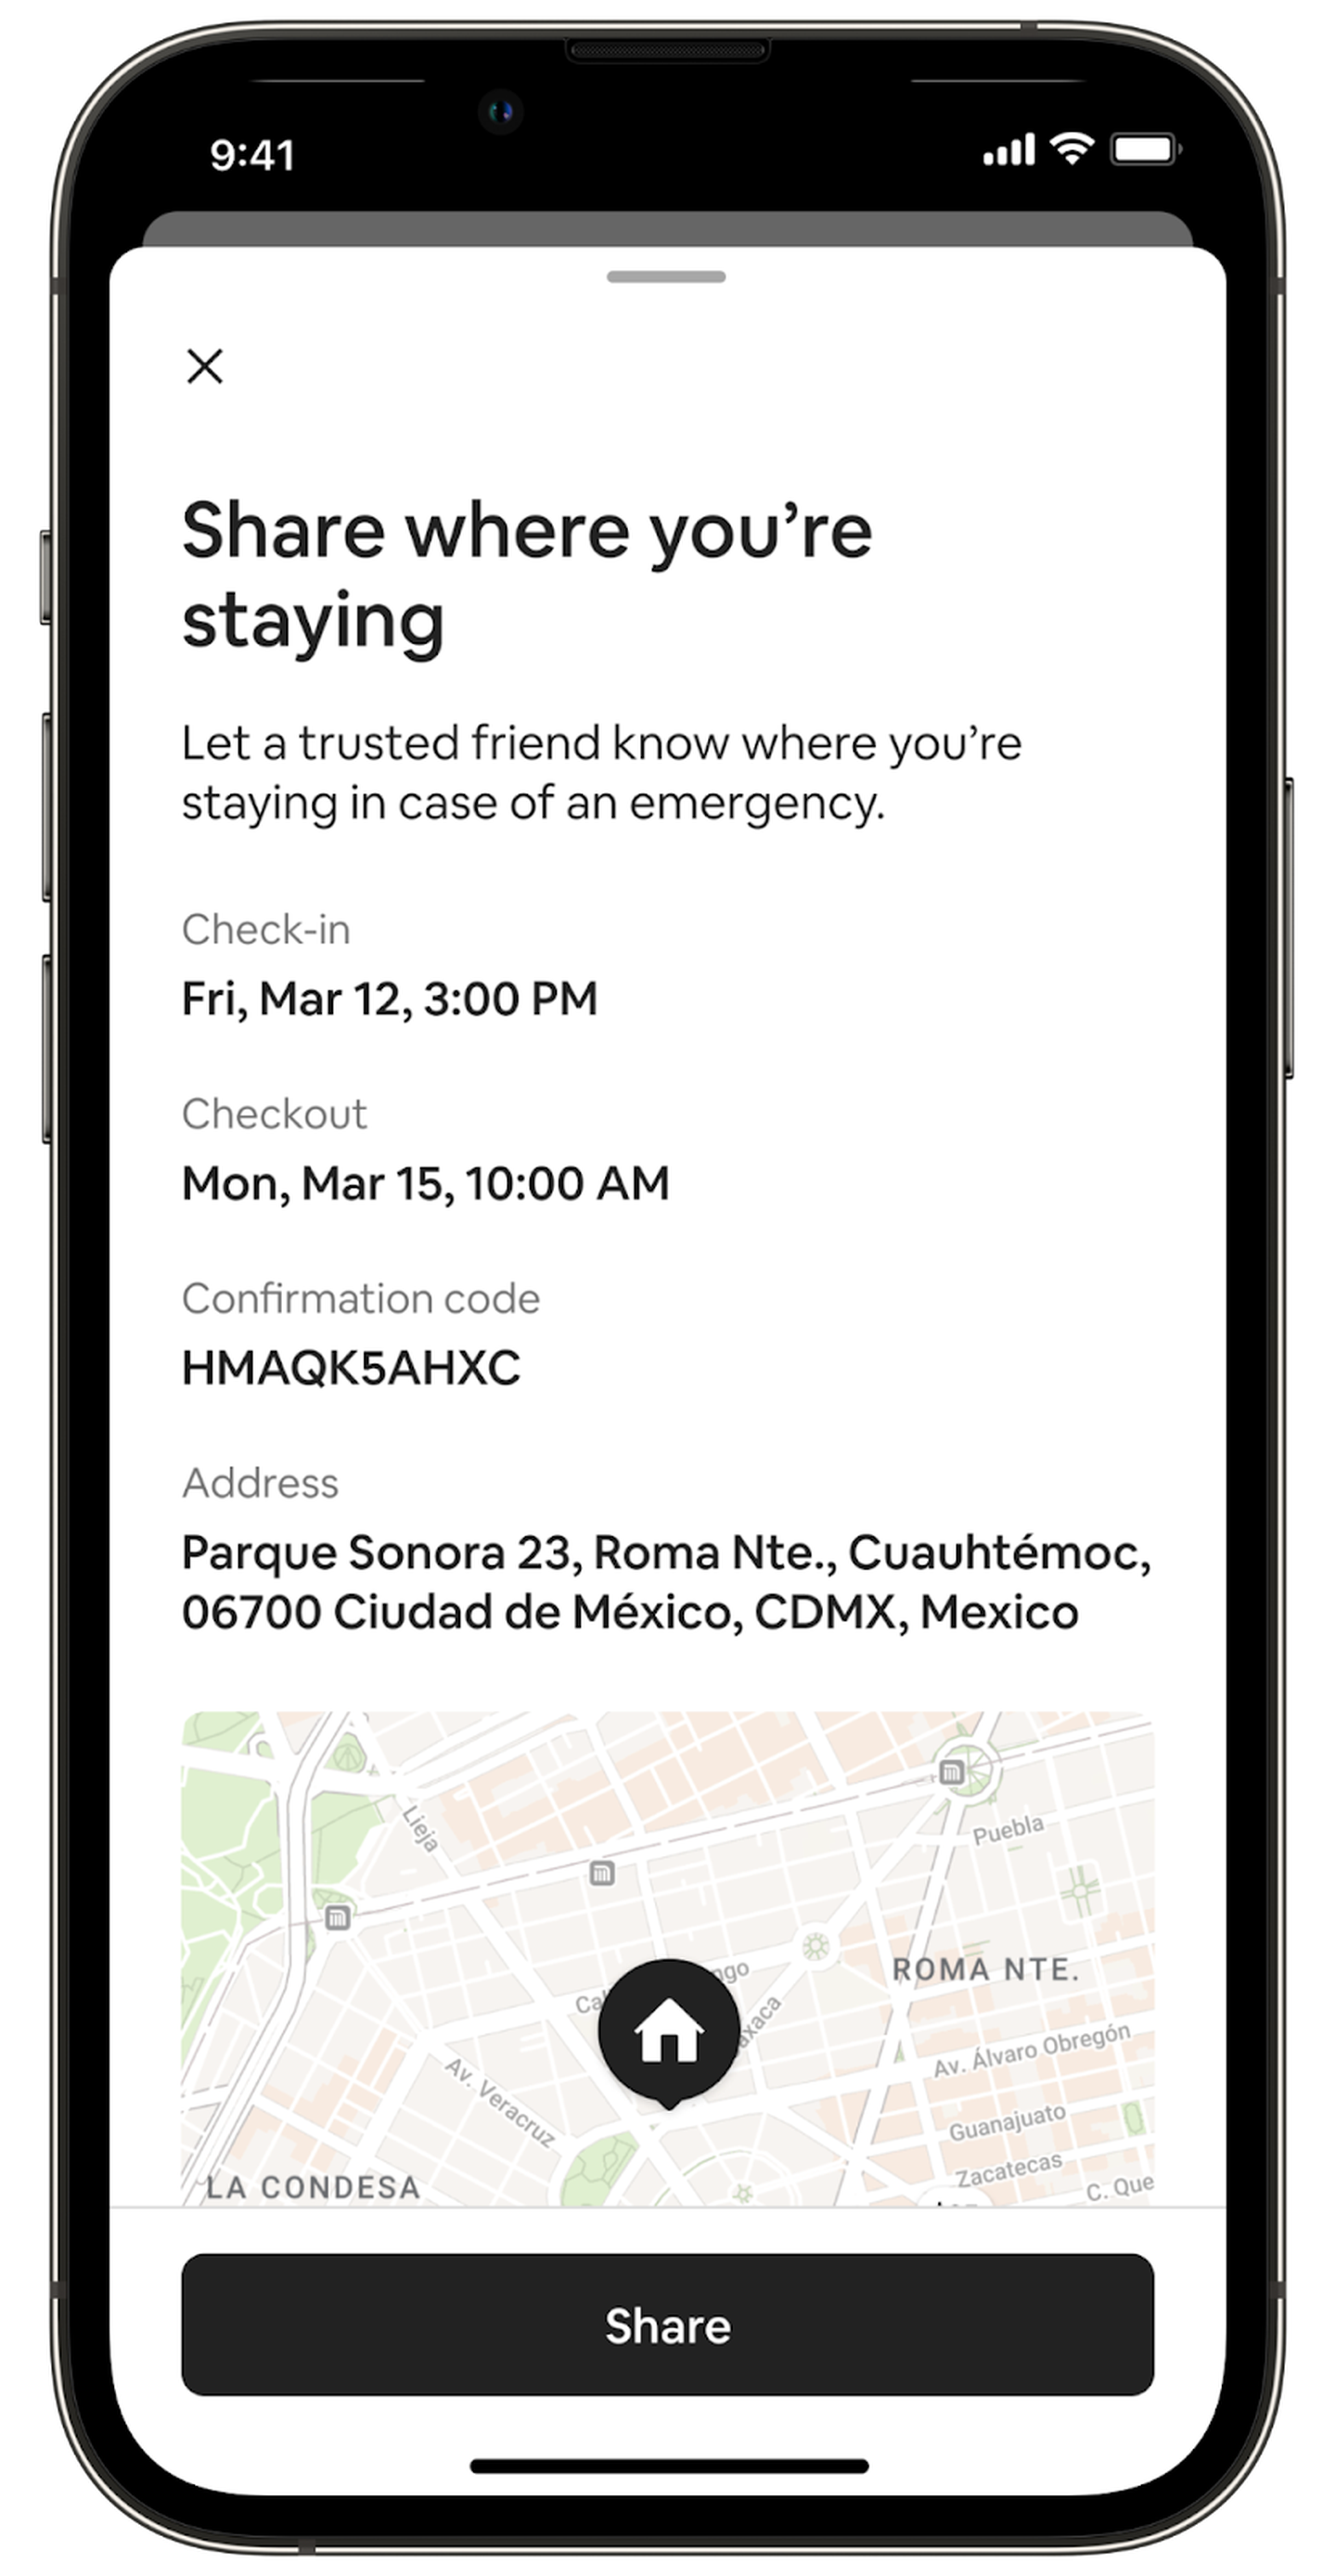 Airbnb solo travellers can easily share their itinerary details with friends and family. Photo: Airbnb